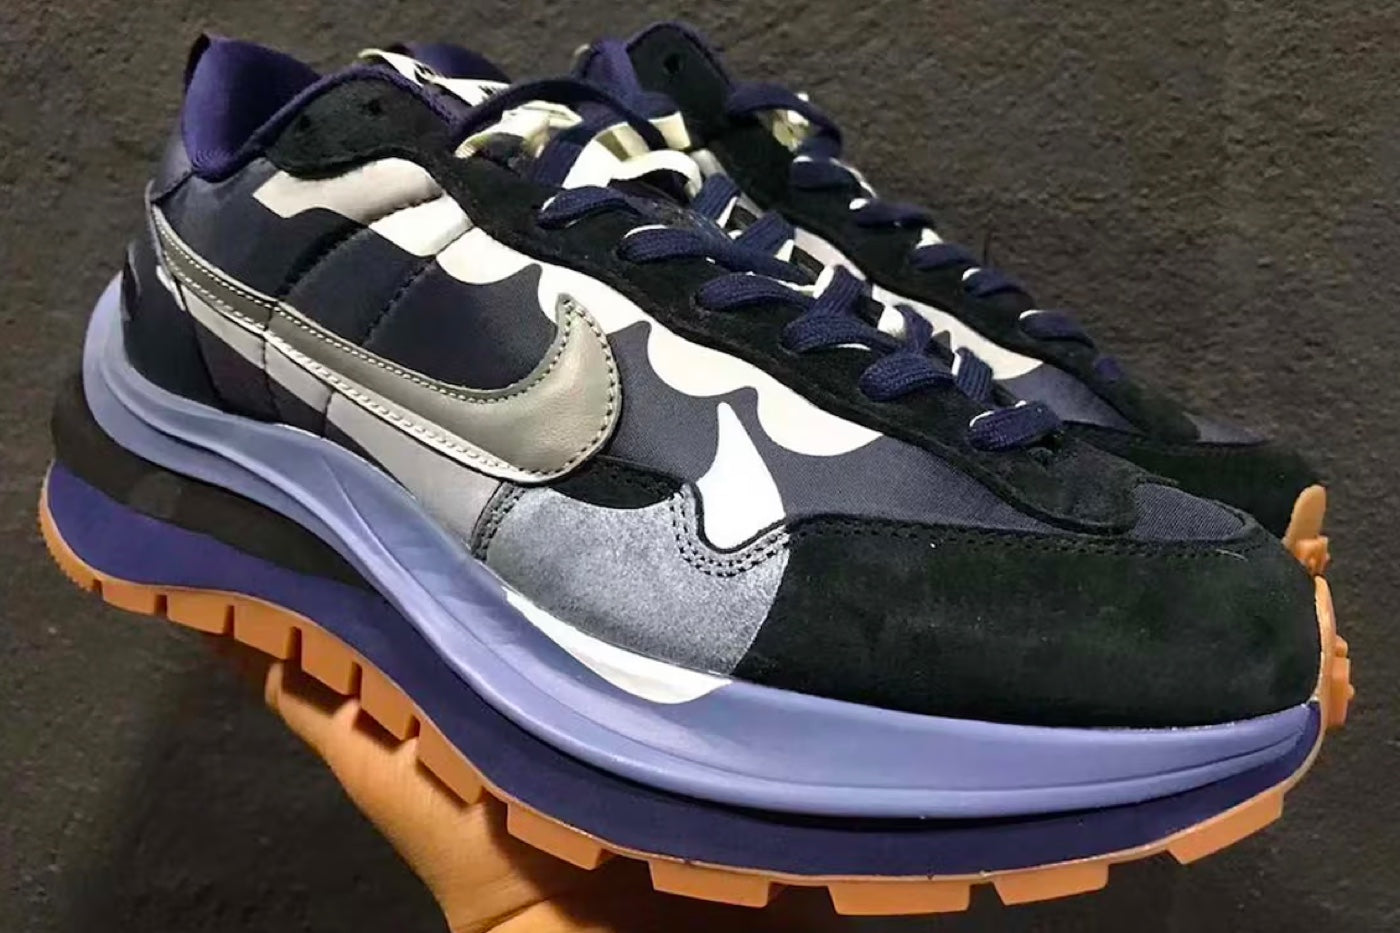 The sacai x Nike VaporWaffle Has Been Revealed in Even More Colourways